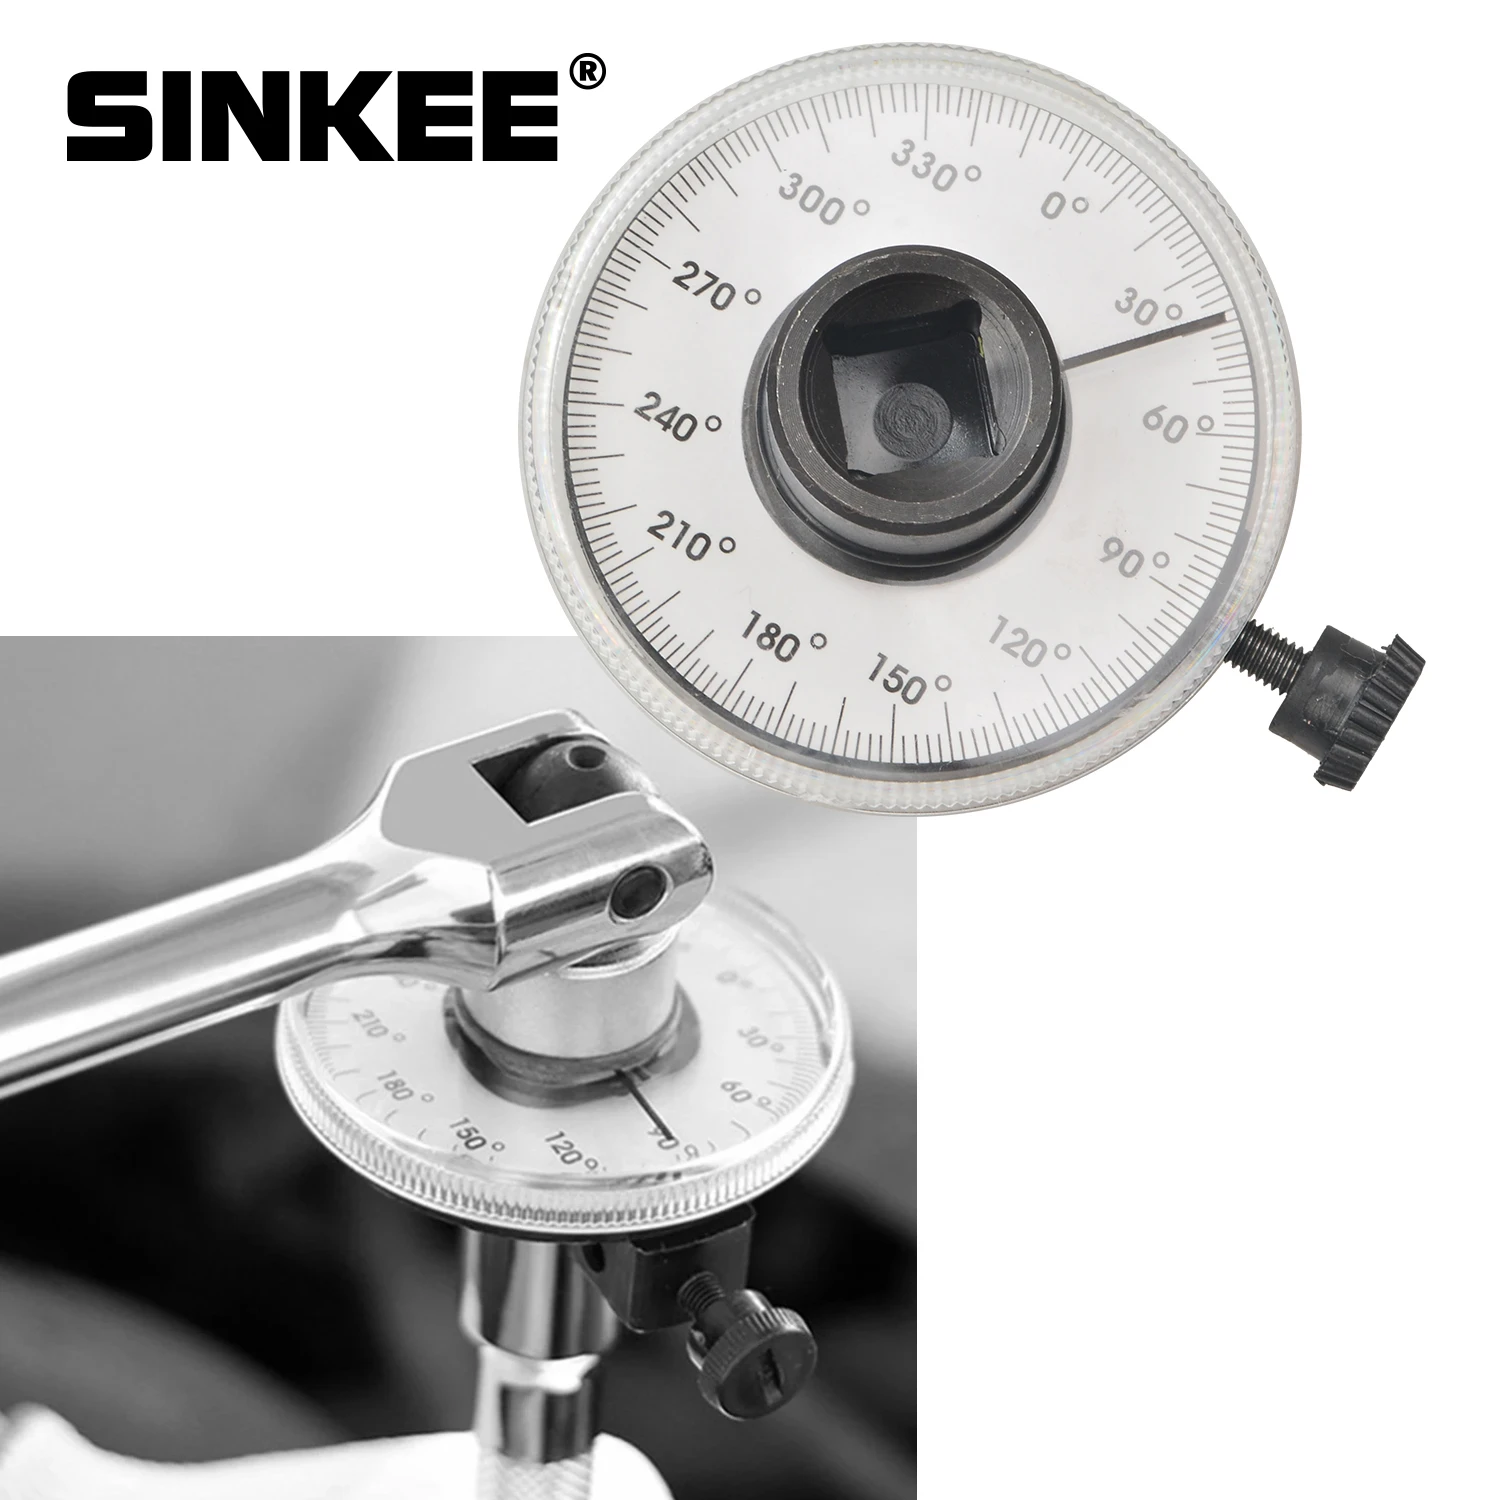 

360 Degree 1/2" Drive Adjustable Torque Angle Gauge Meter Angle Rotation Measurer Tool Wrench Auto Repair Check Meter